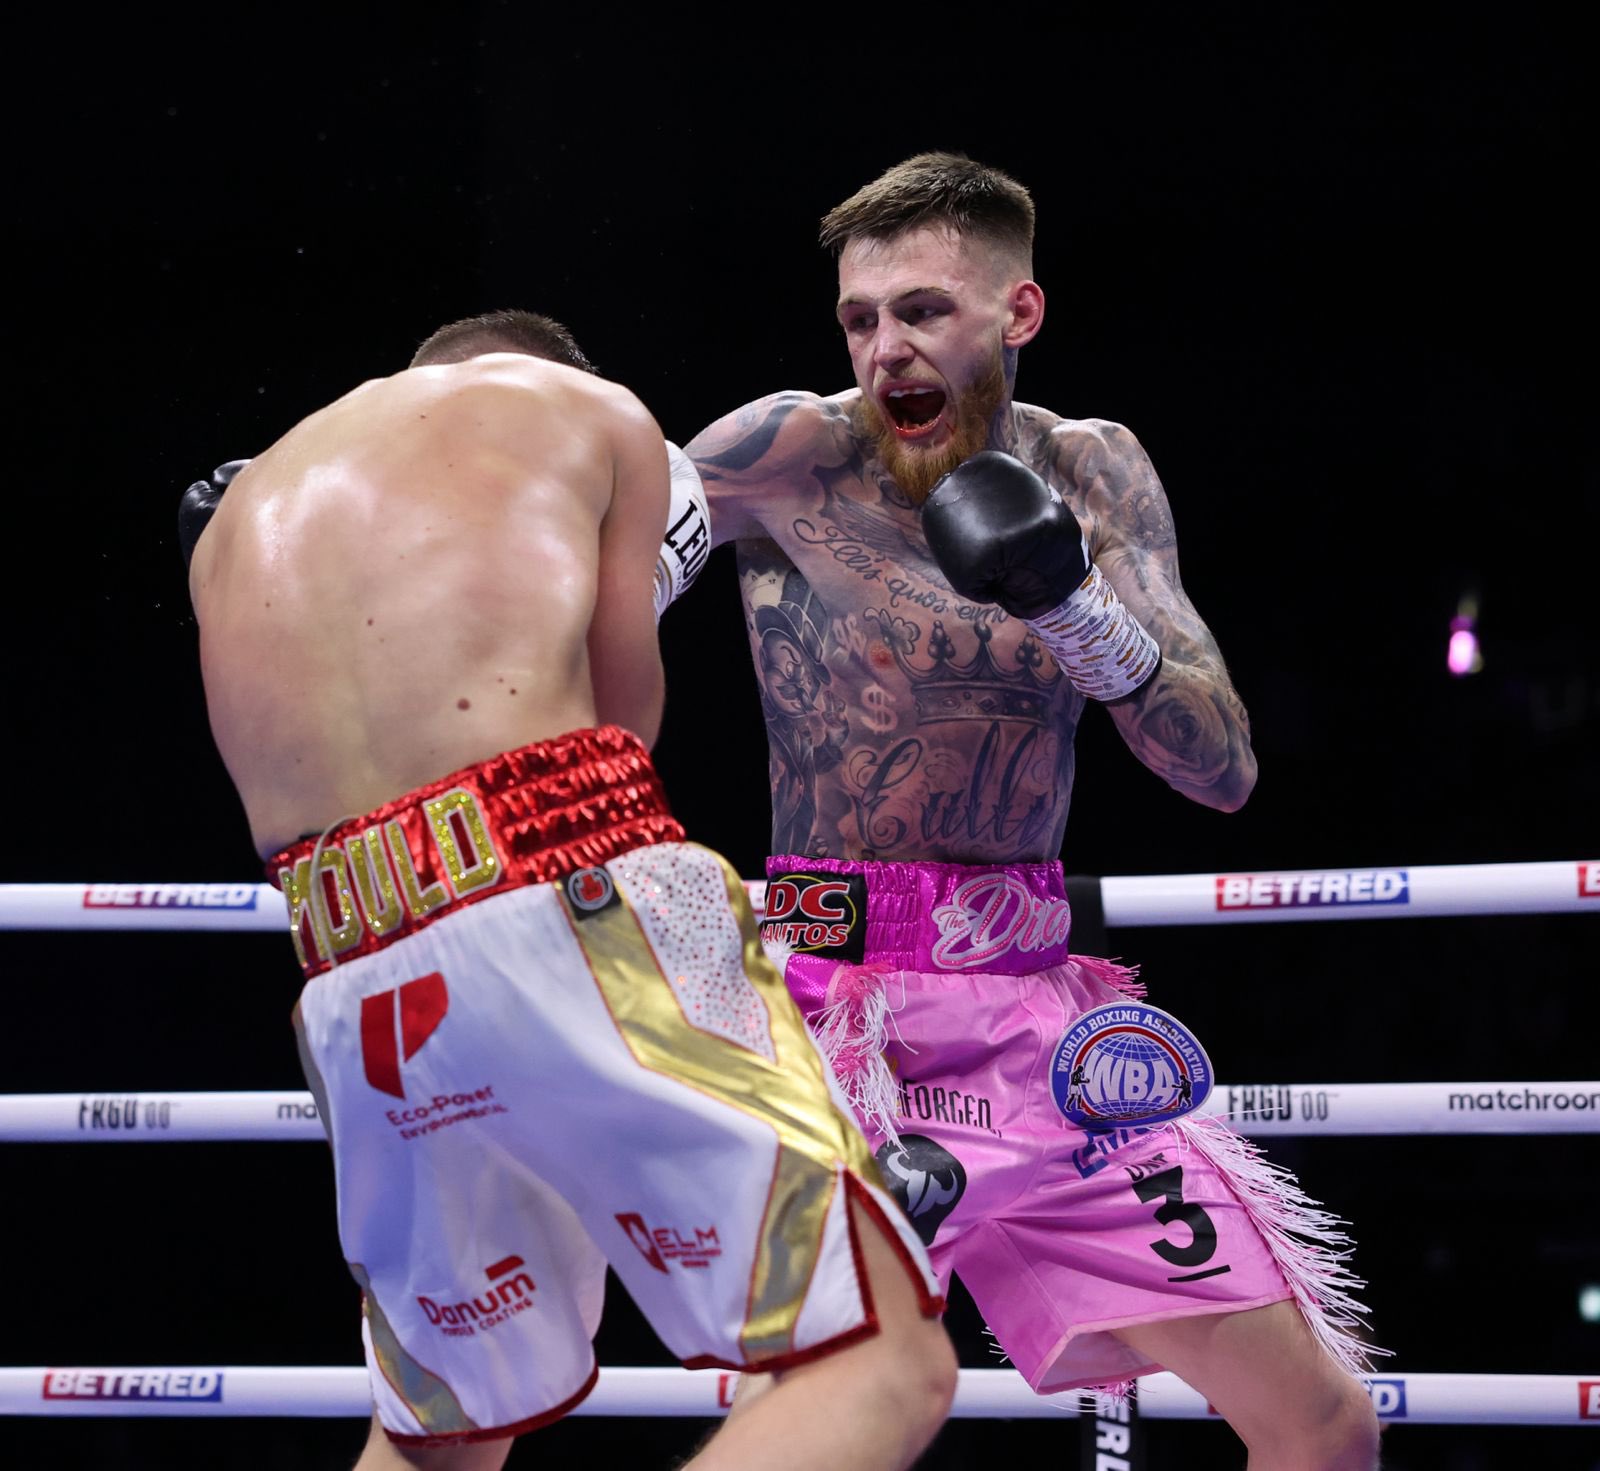 Cully is new WBA Continental Europe lightweight champion